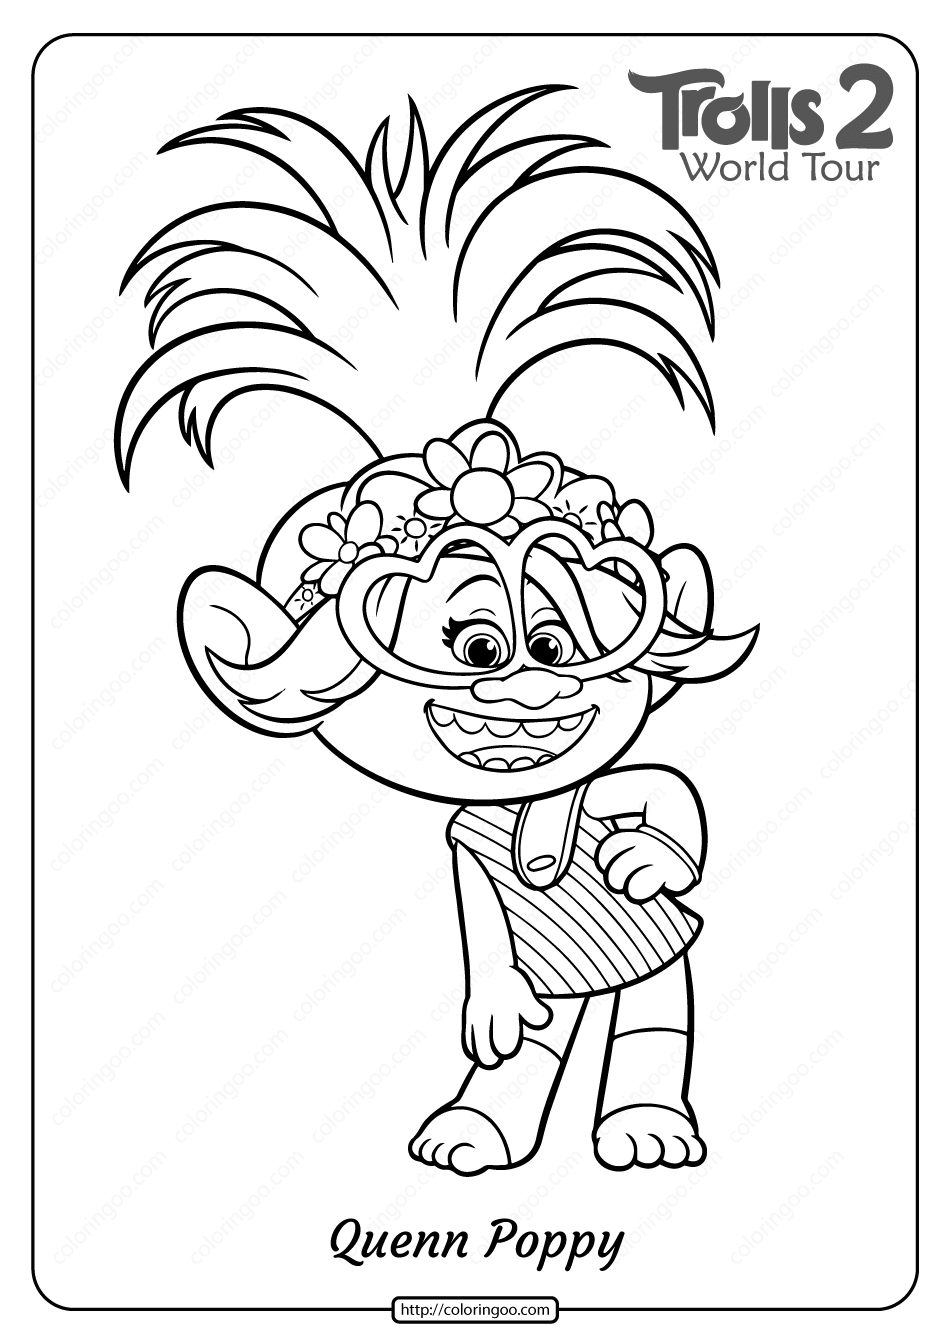 Free Printable Trolls 2 Queen Poppy Coloring Page